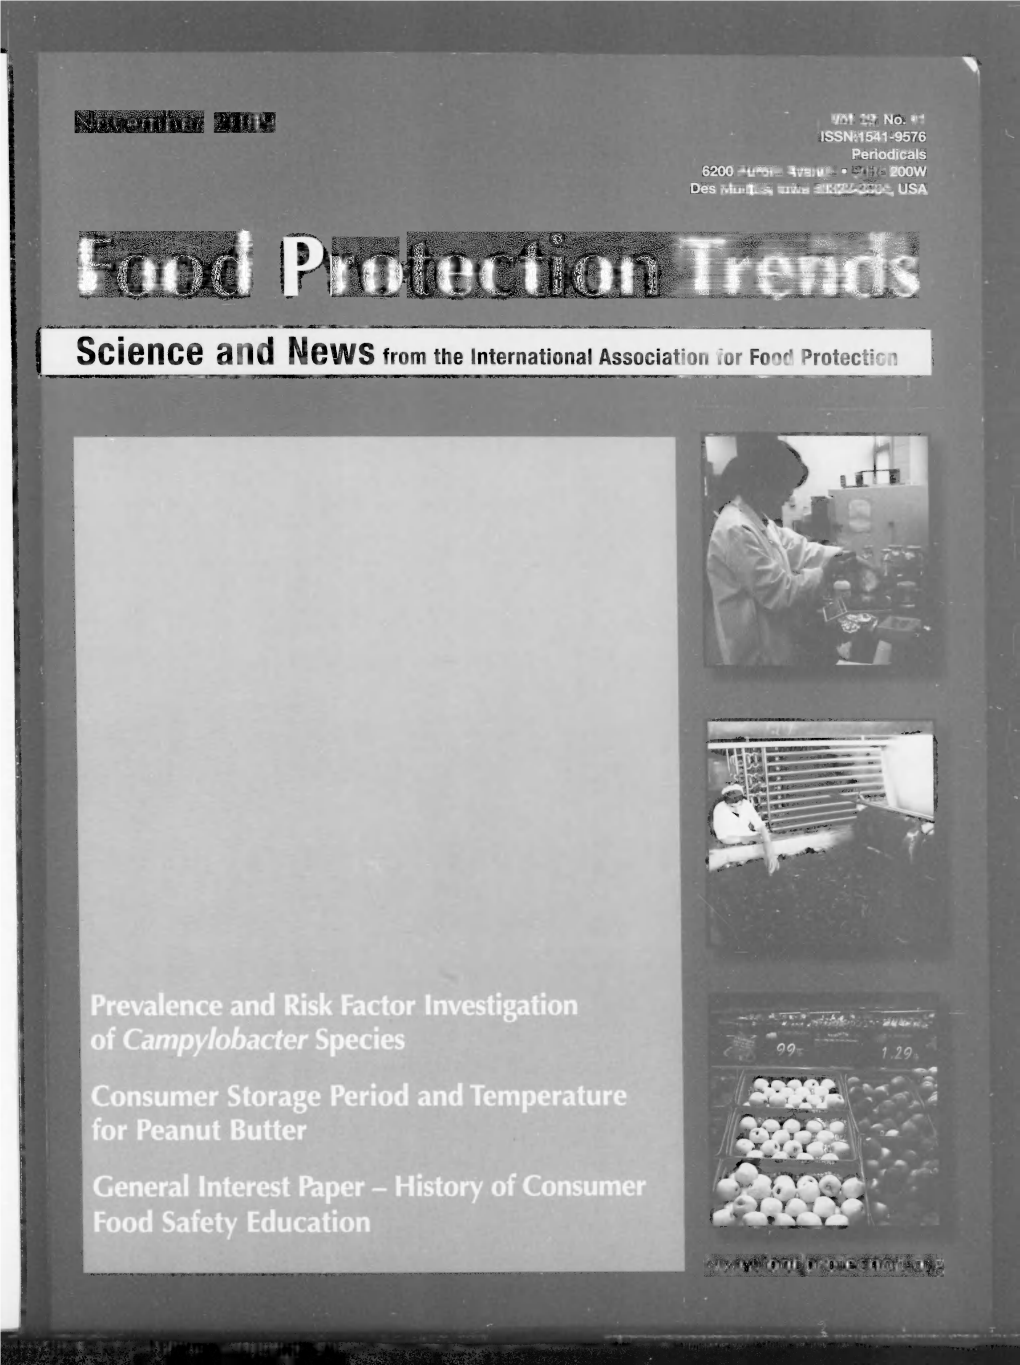 Food Protection Trends 2009-11: Vol 29 Iss 11